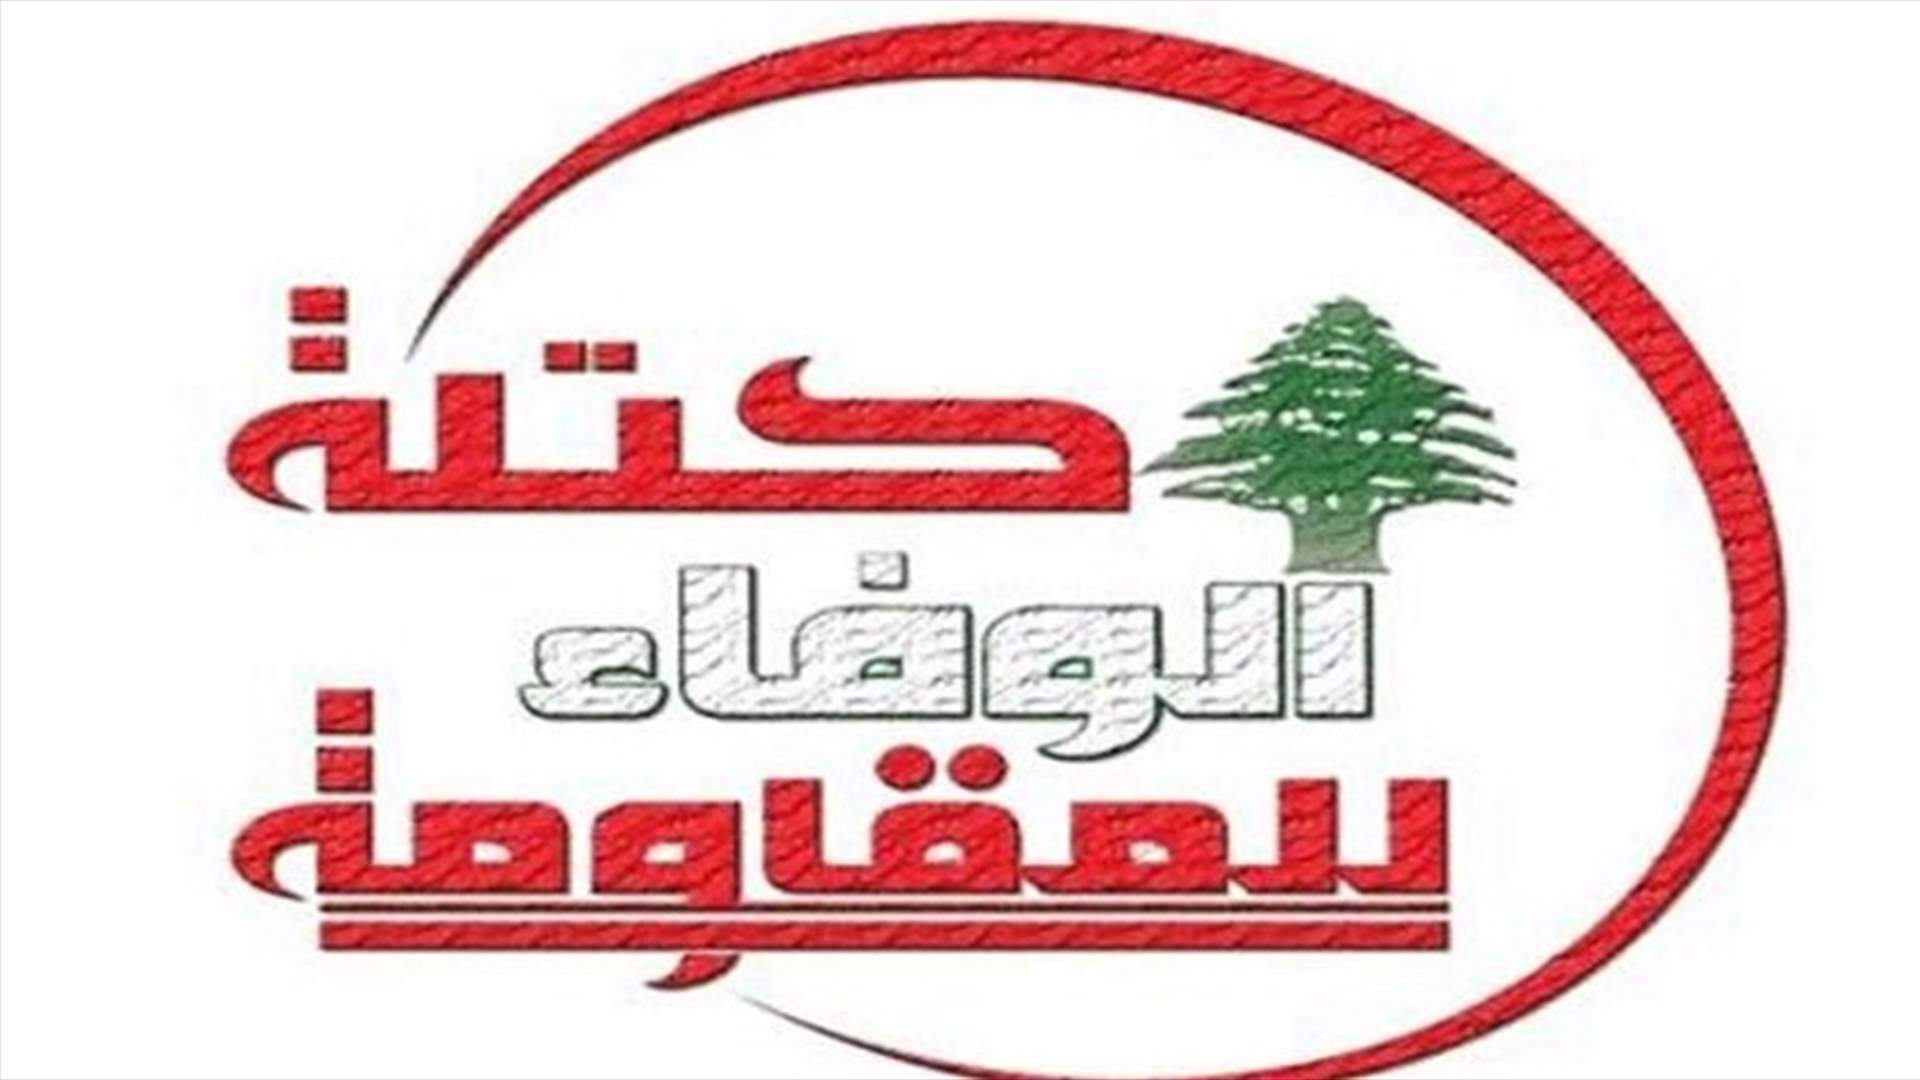 Loyalty to the Resistance bloc: Arabsat’s decision to suspend al-Manar TV is a political attack